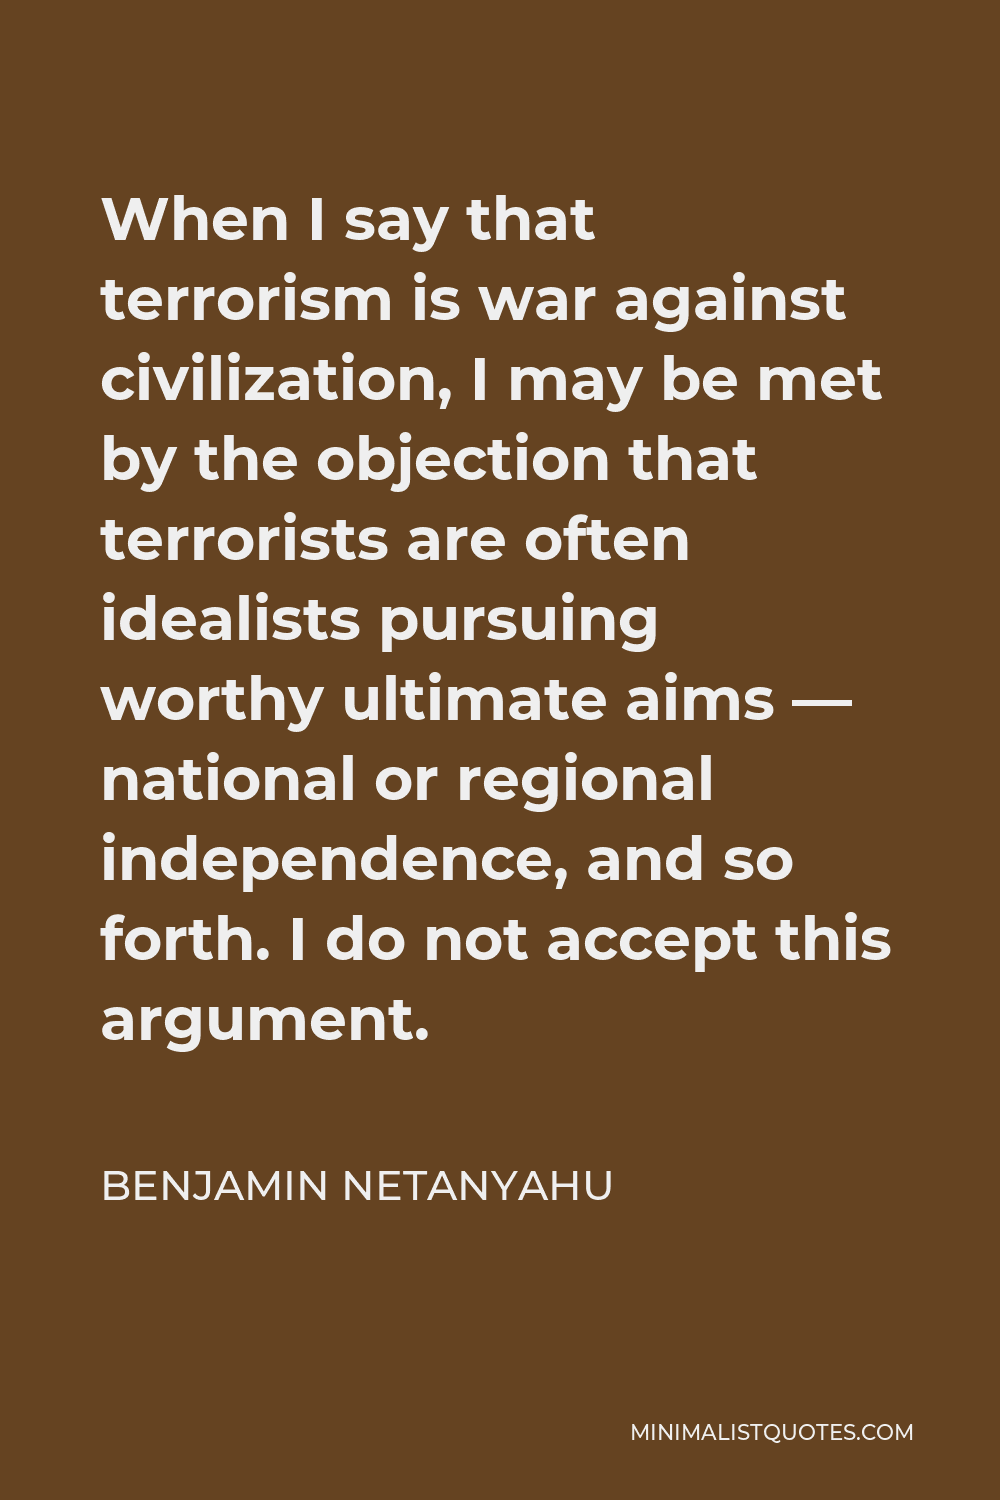 Benjamin Netanyahu Quote - When I say that terrorism is war against civilization, I may be met by the objection that terrorists are often idealists pursuing worthy ultimate aims — national or regional independence, and so forth. I do not accept this argument.